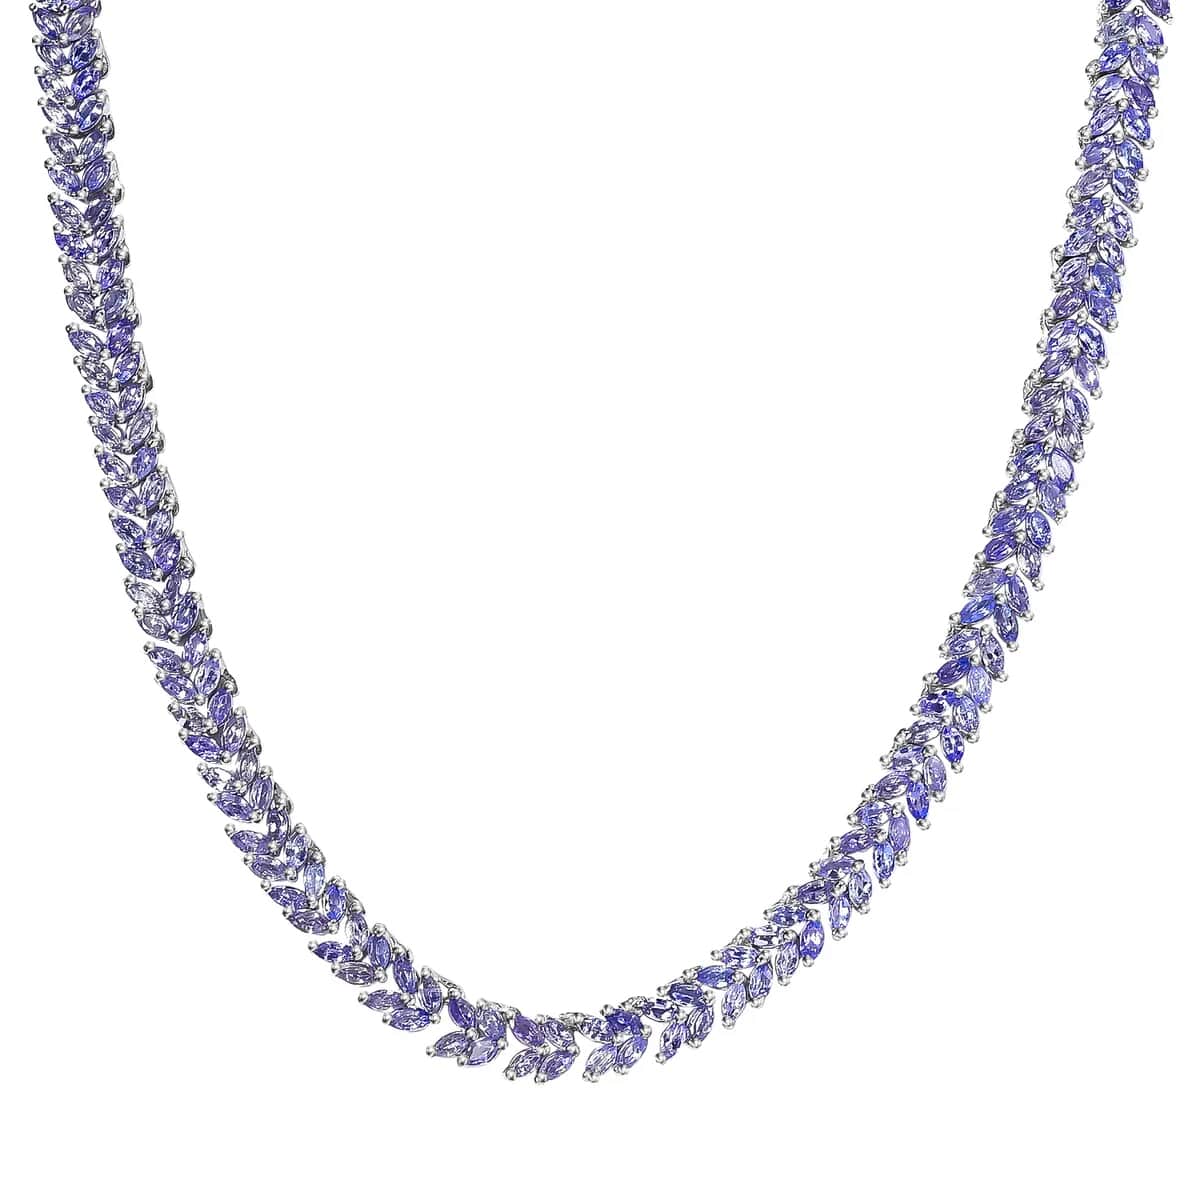 Karis Tanzanite Necklace in Platinum Bond, Double Row Necklace, Tanzanite Jewelry 20.50 ctw (18 Inches) image number 4